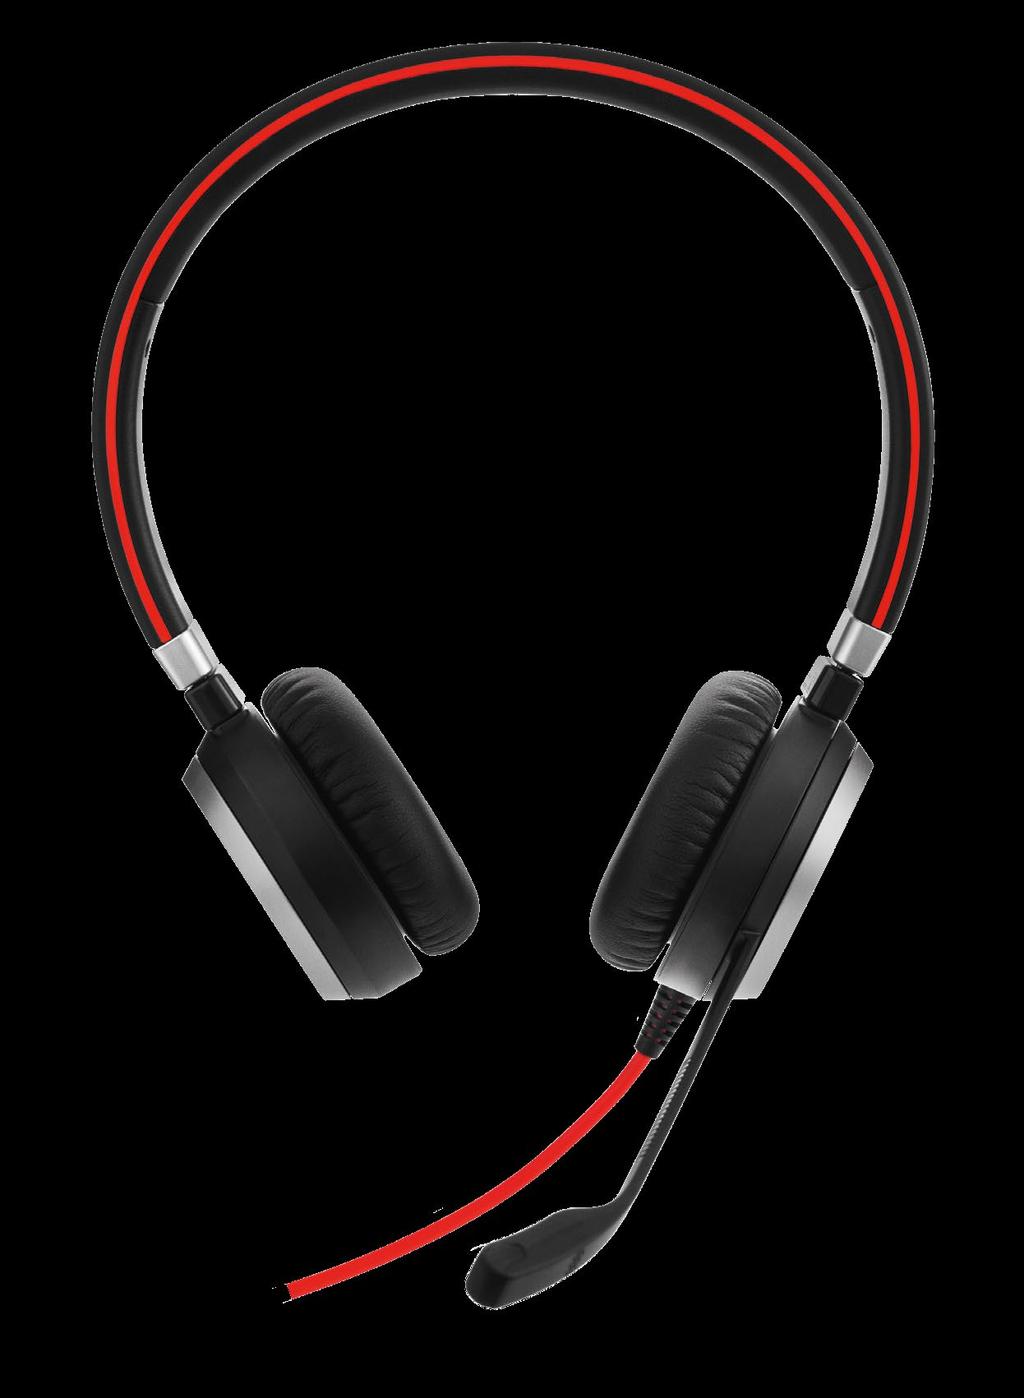 The noise cancellation and busy light features of the Jabra Evolve 40 will enhance concentration and minimize interruptions.